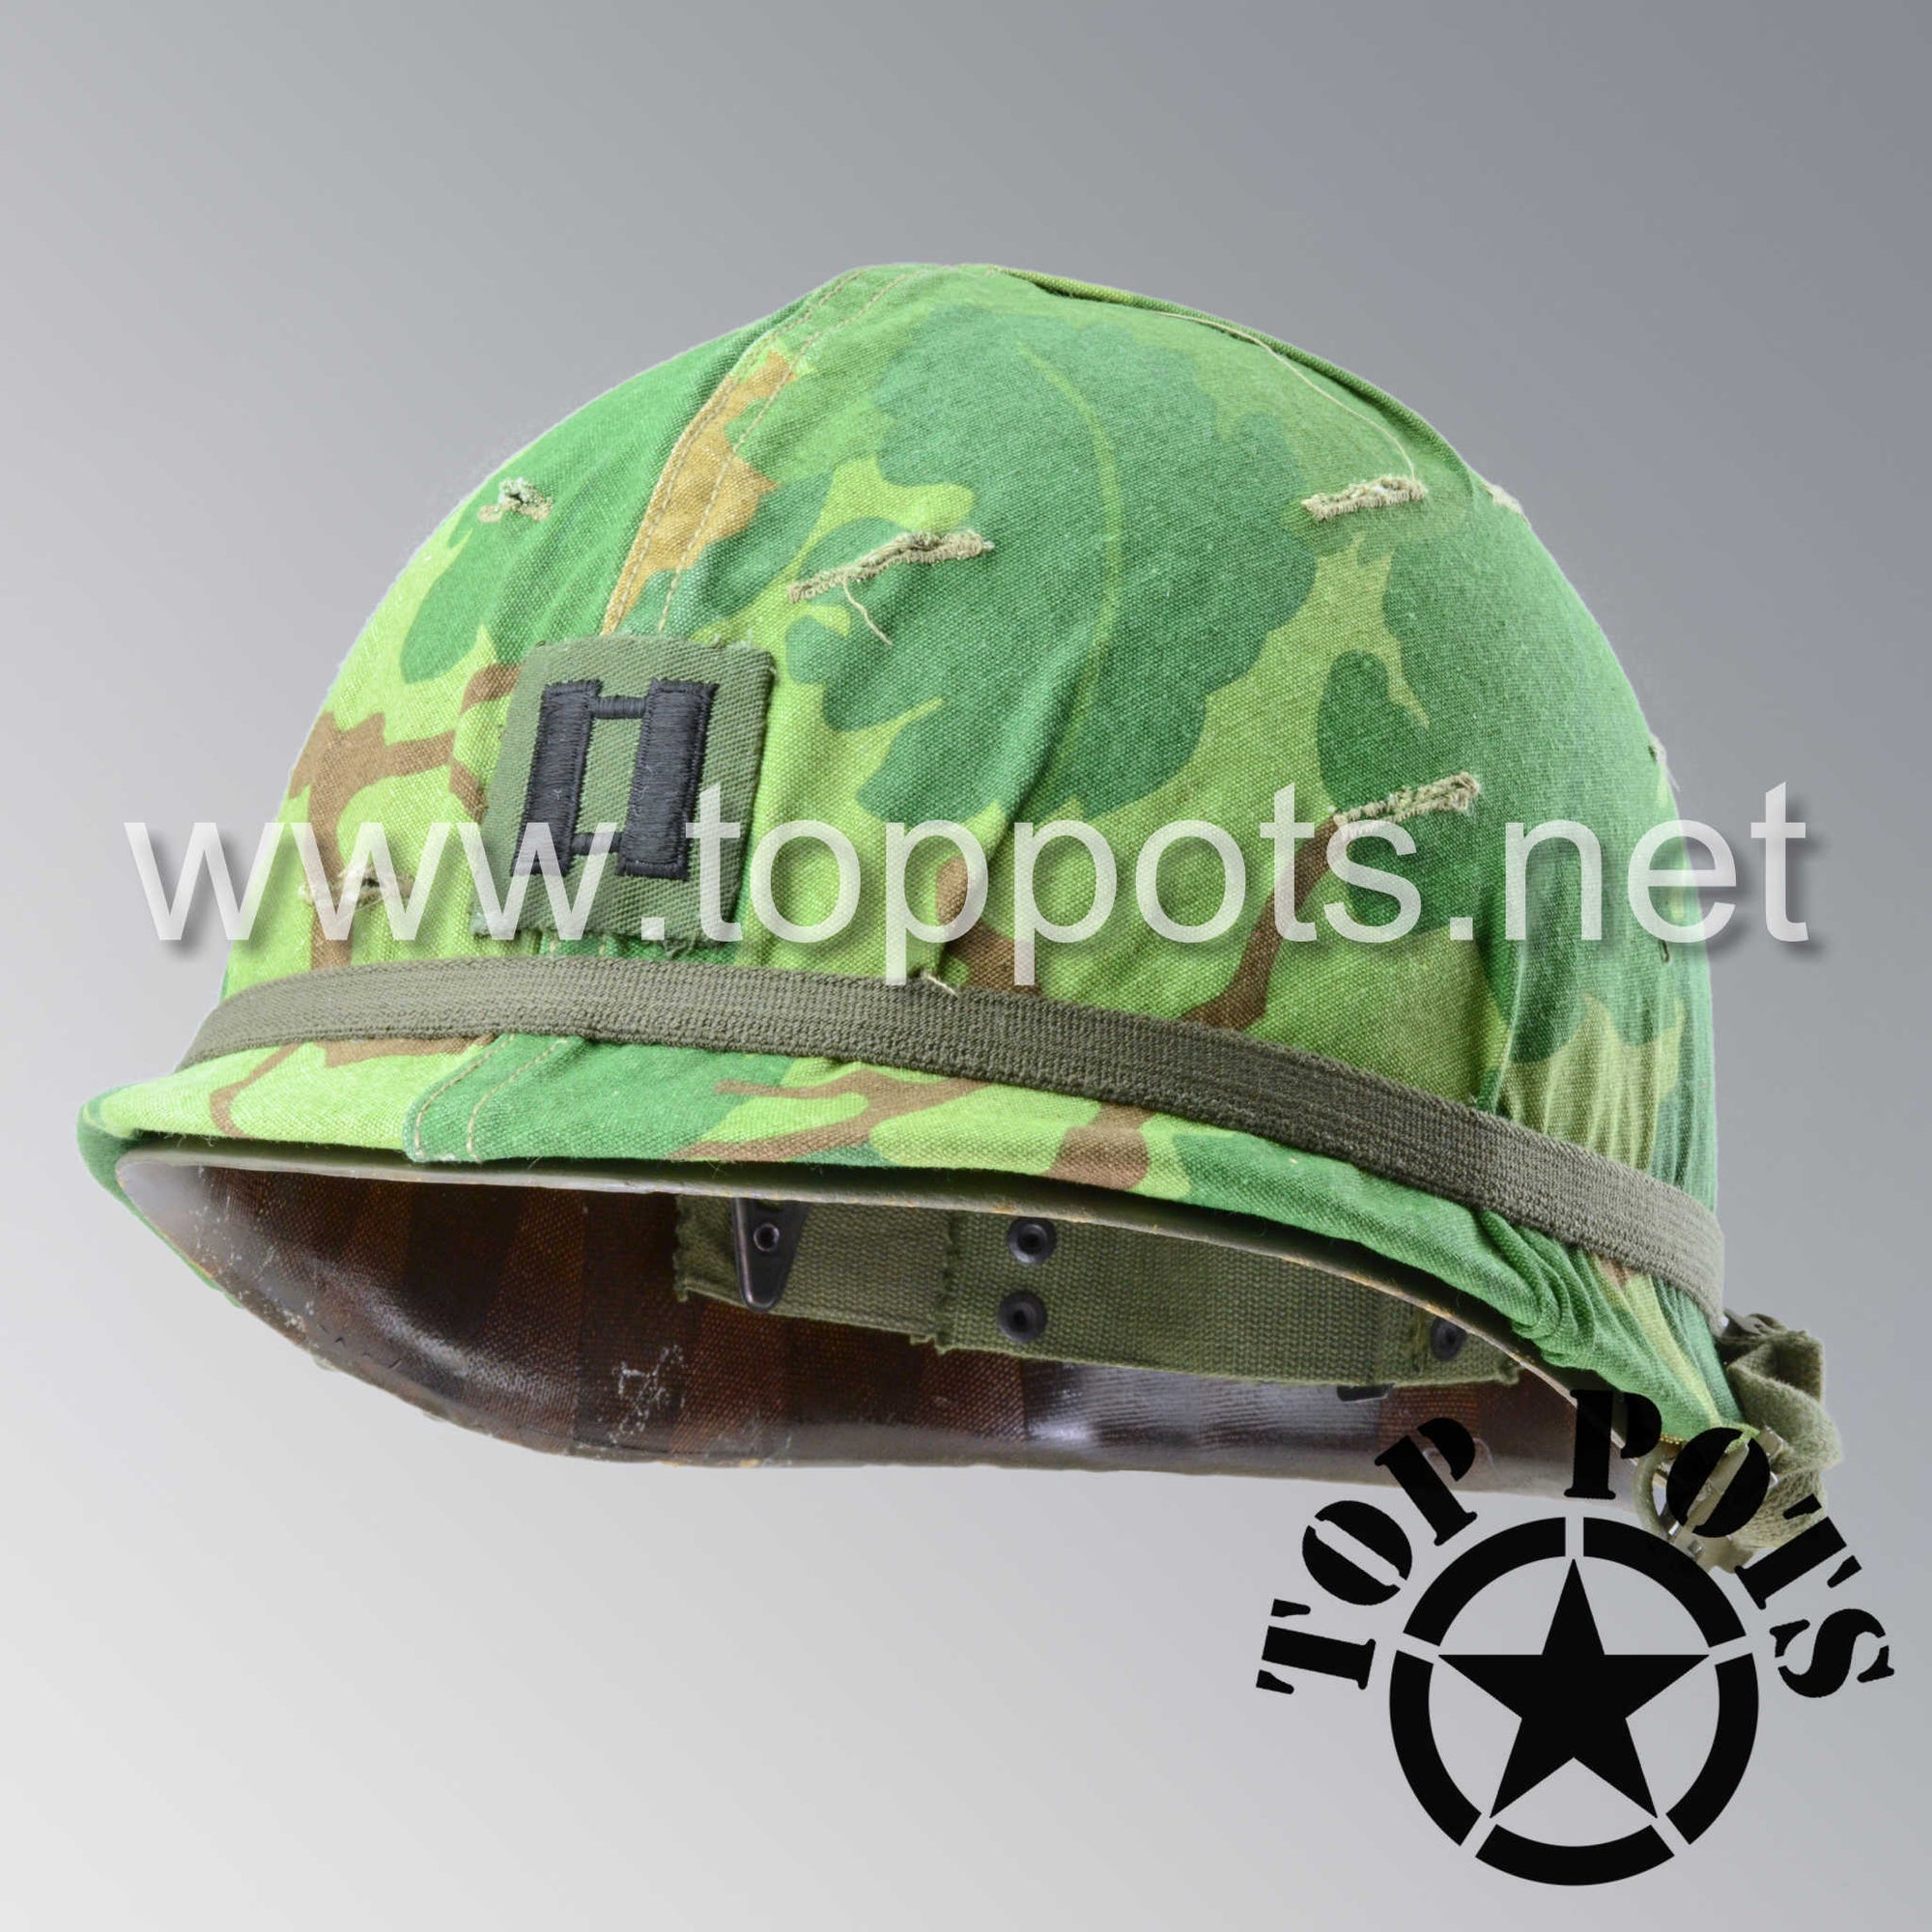 Vietnam War US Army Restored Original M1 Infantry Helmet Swivel Bale Shell and P55 Liner with Captain Insignia Mitchell Camouflage Cover